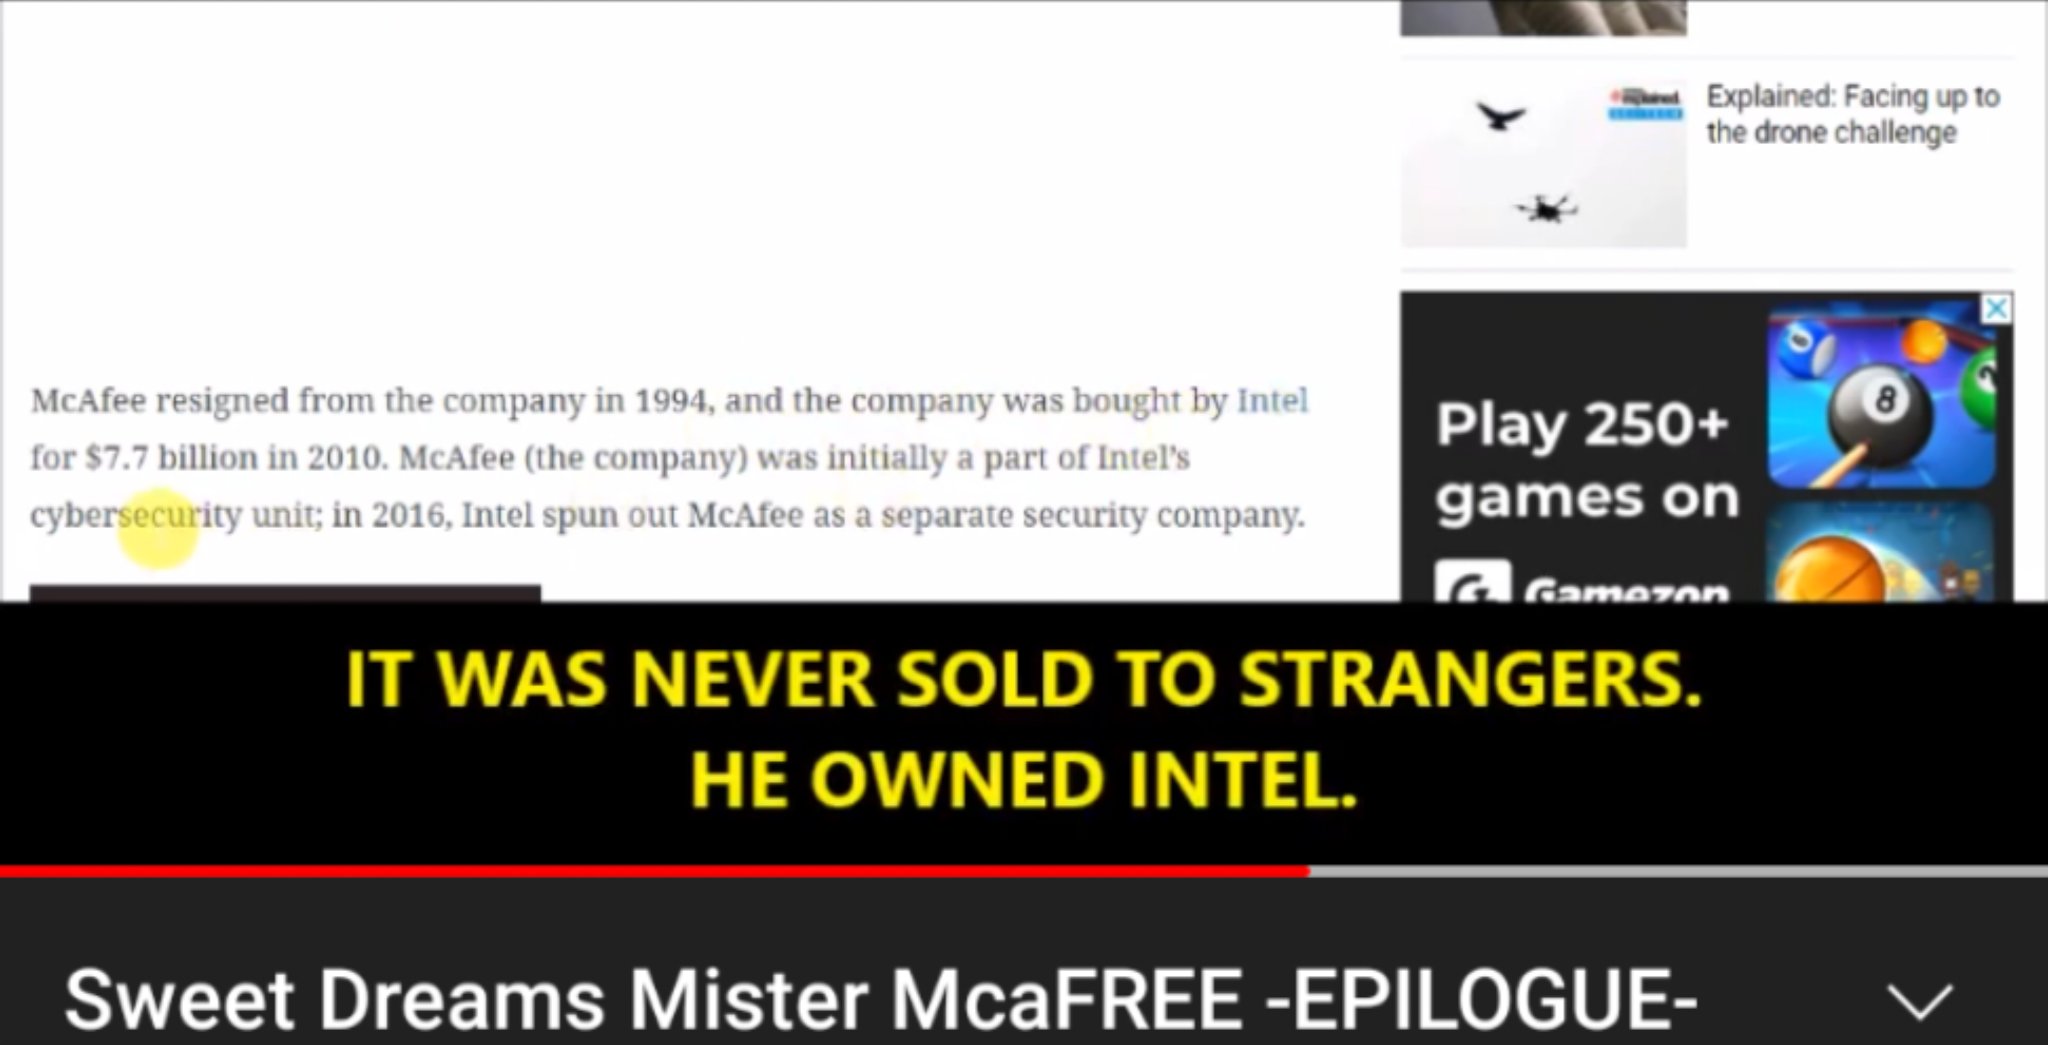 John McAfee Found Dead in Prison Cell after US Extradition Approved E5zYGM8WQAcWIsA?format=jpg&name=large